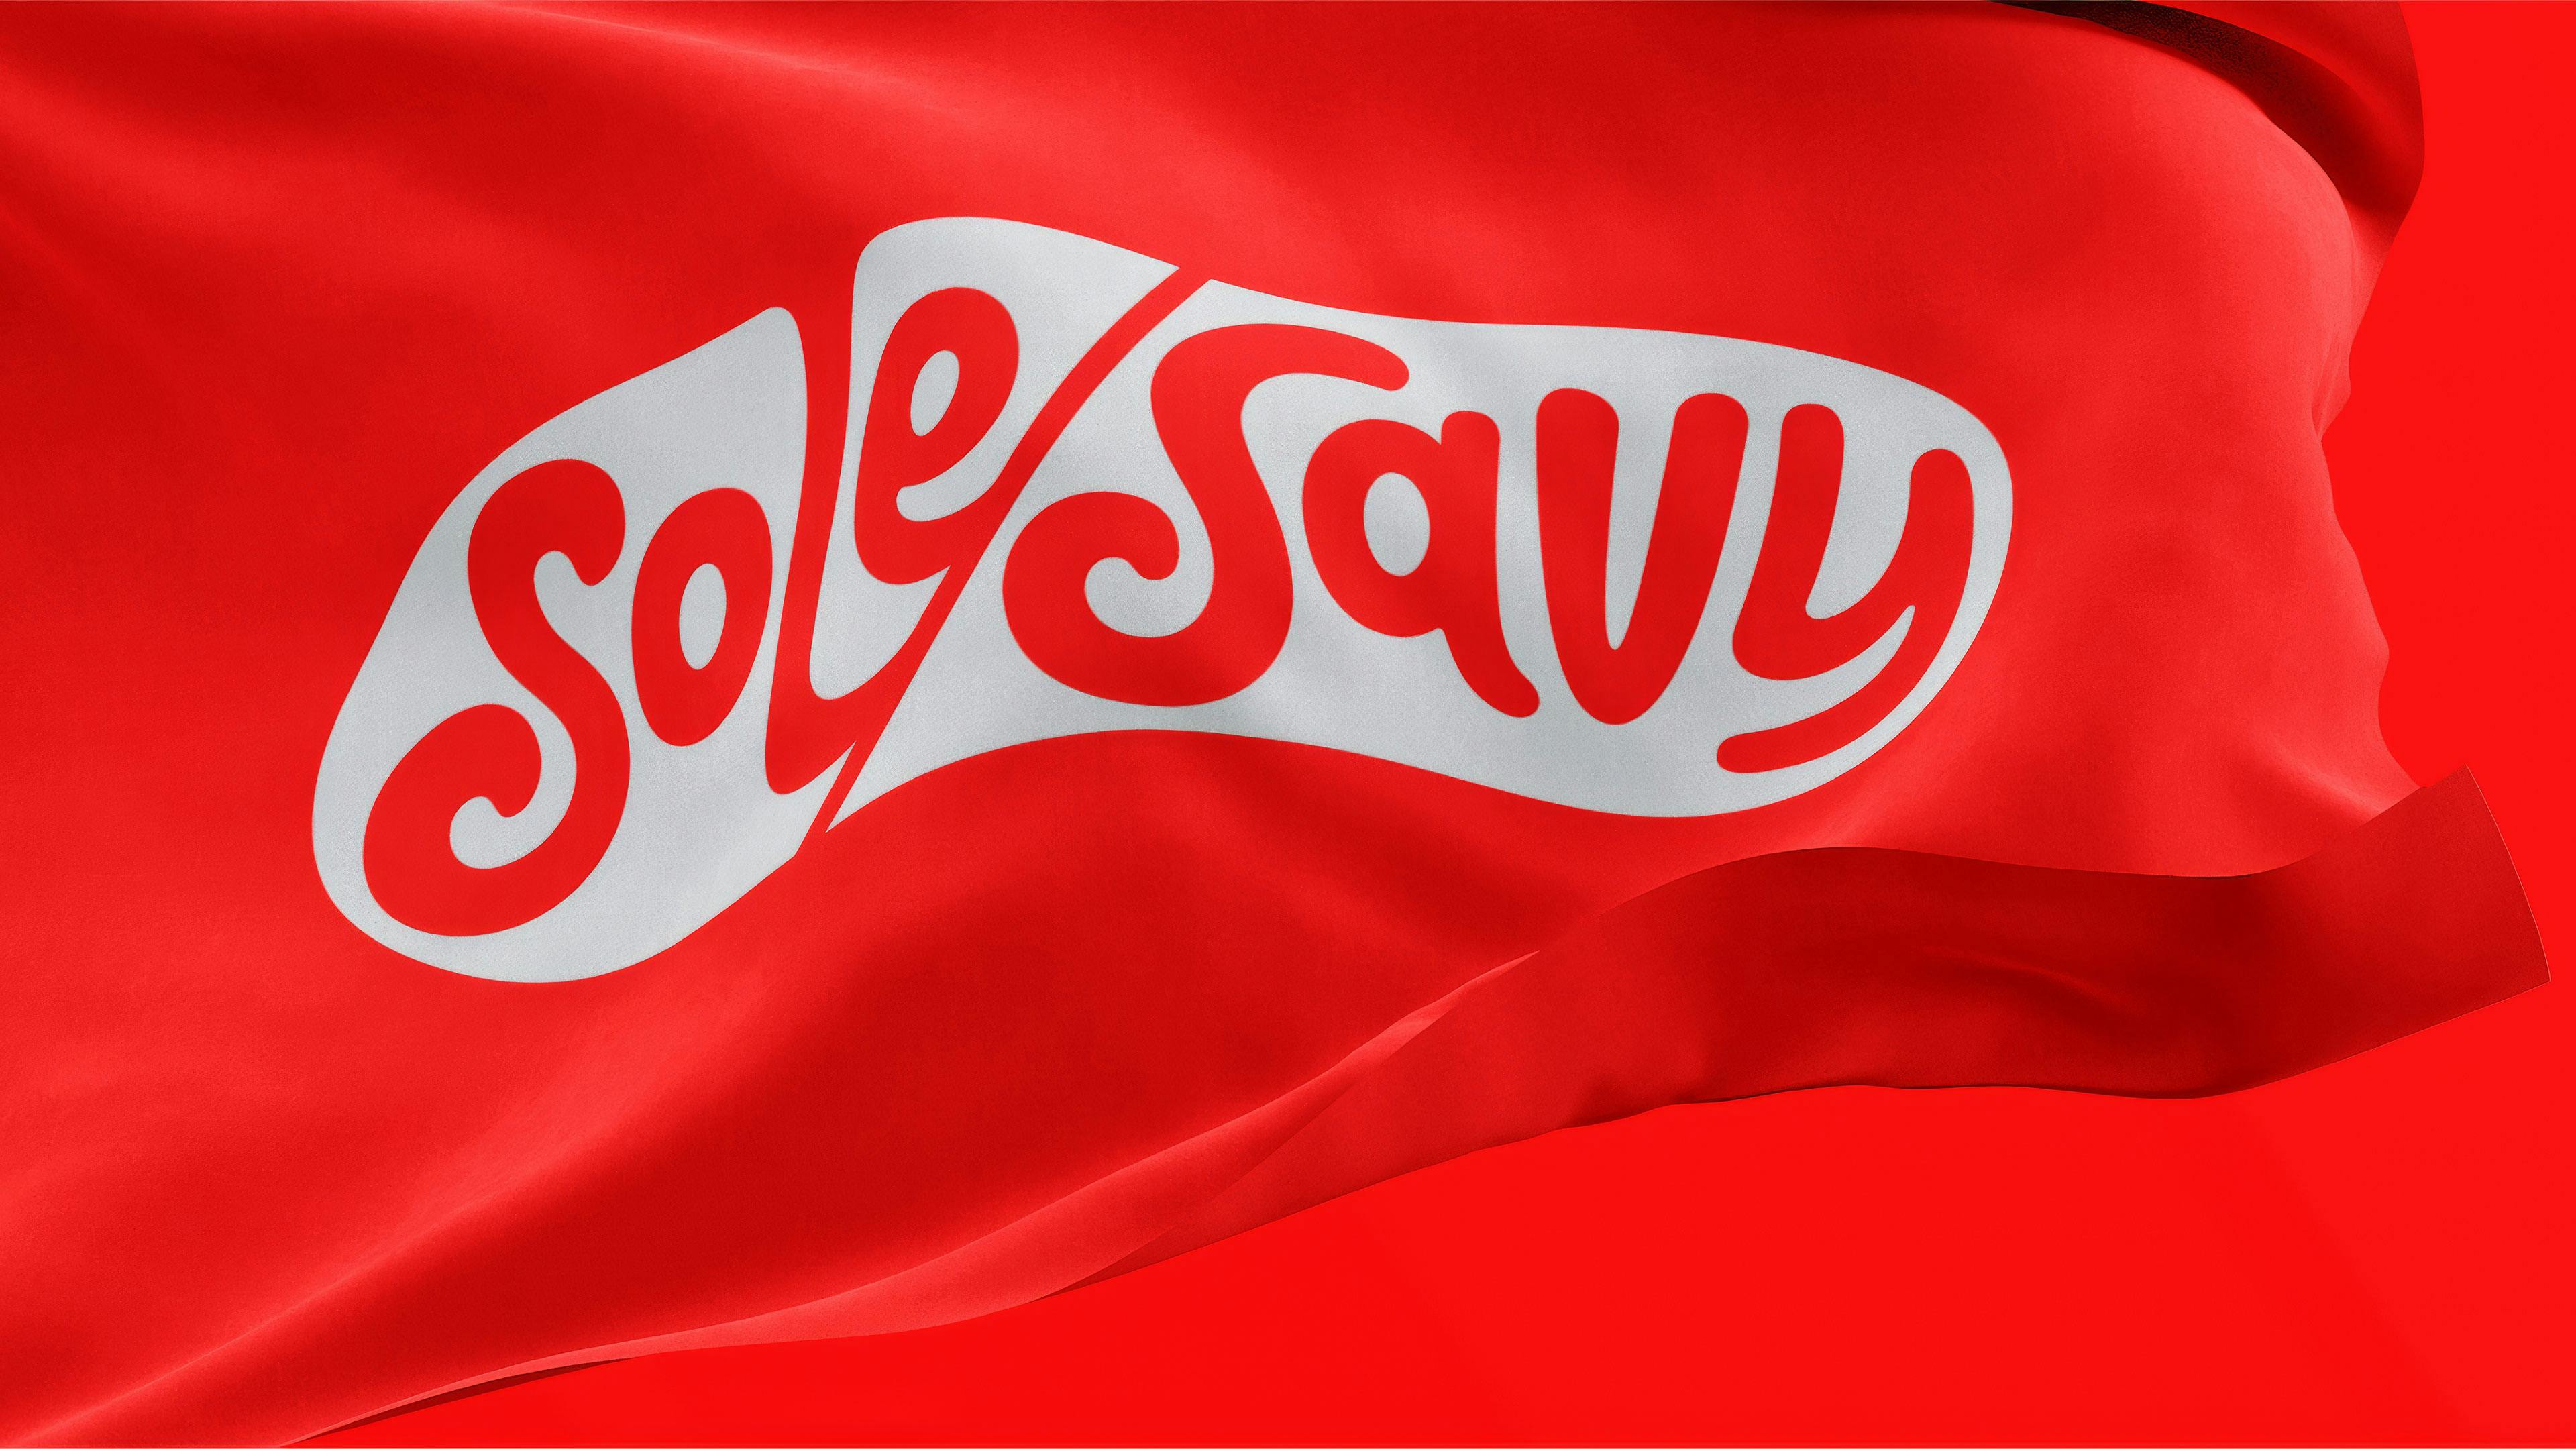 SoleSavy — A vibrant brand bringing sneaker culture to the people.